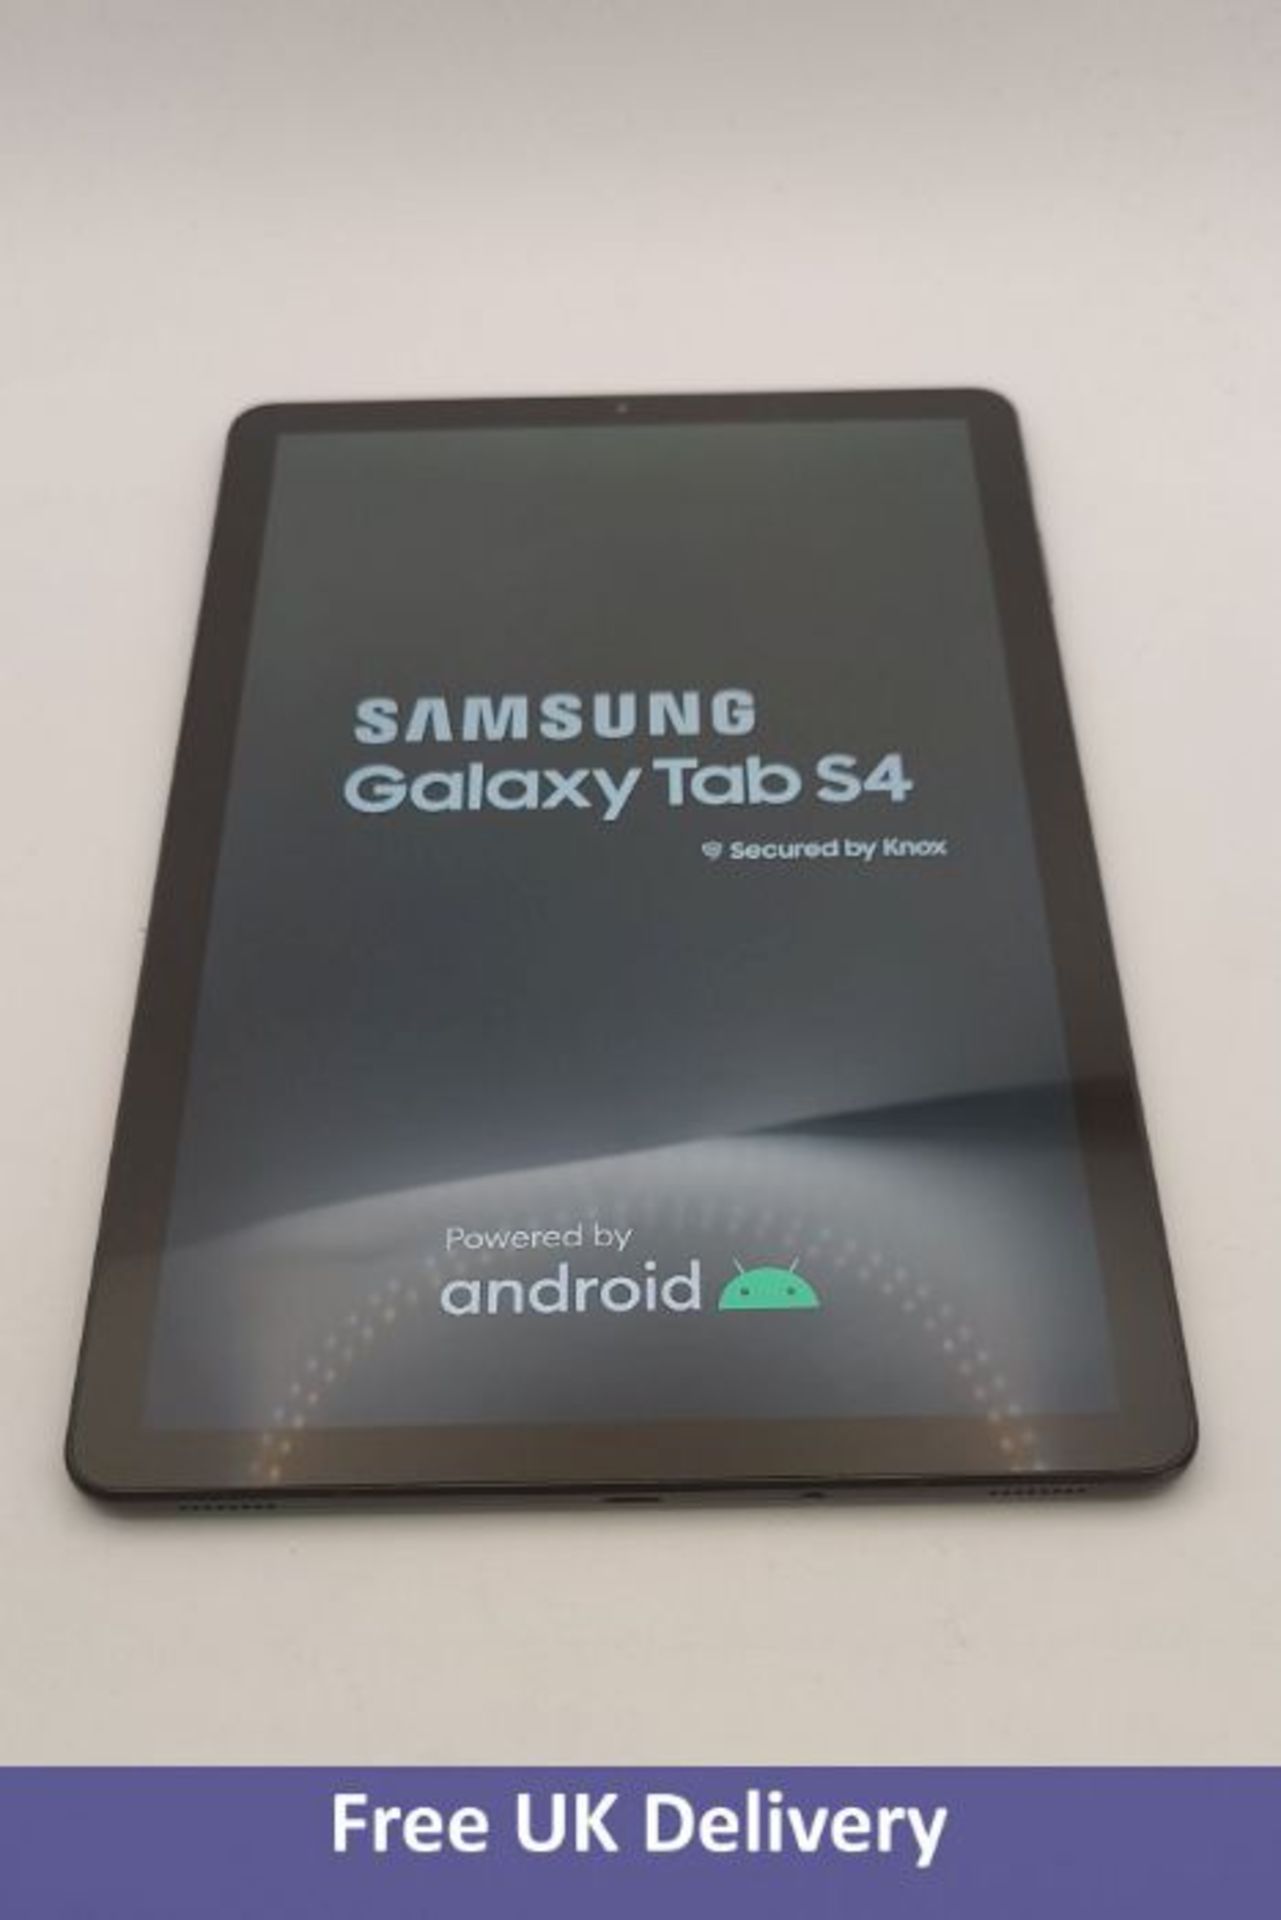 Samsung Galaxy Tab S4 10.5" Android Tablet SM-T830, Android 10, 4GB RAM, 64GB Storage, Black. Used,